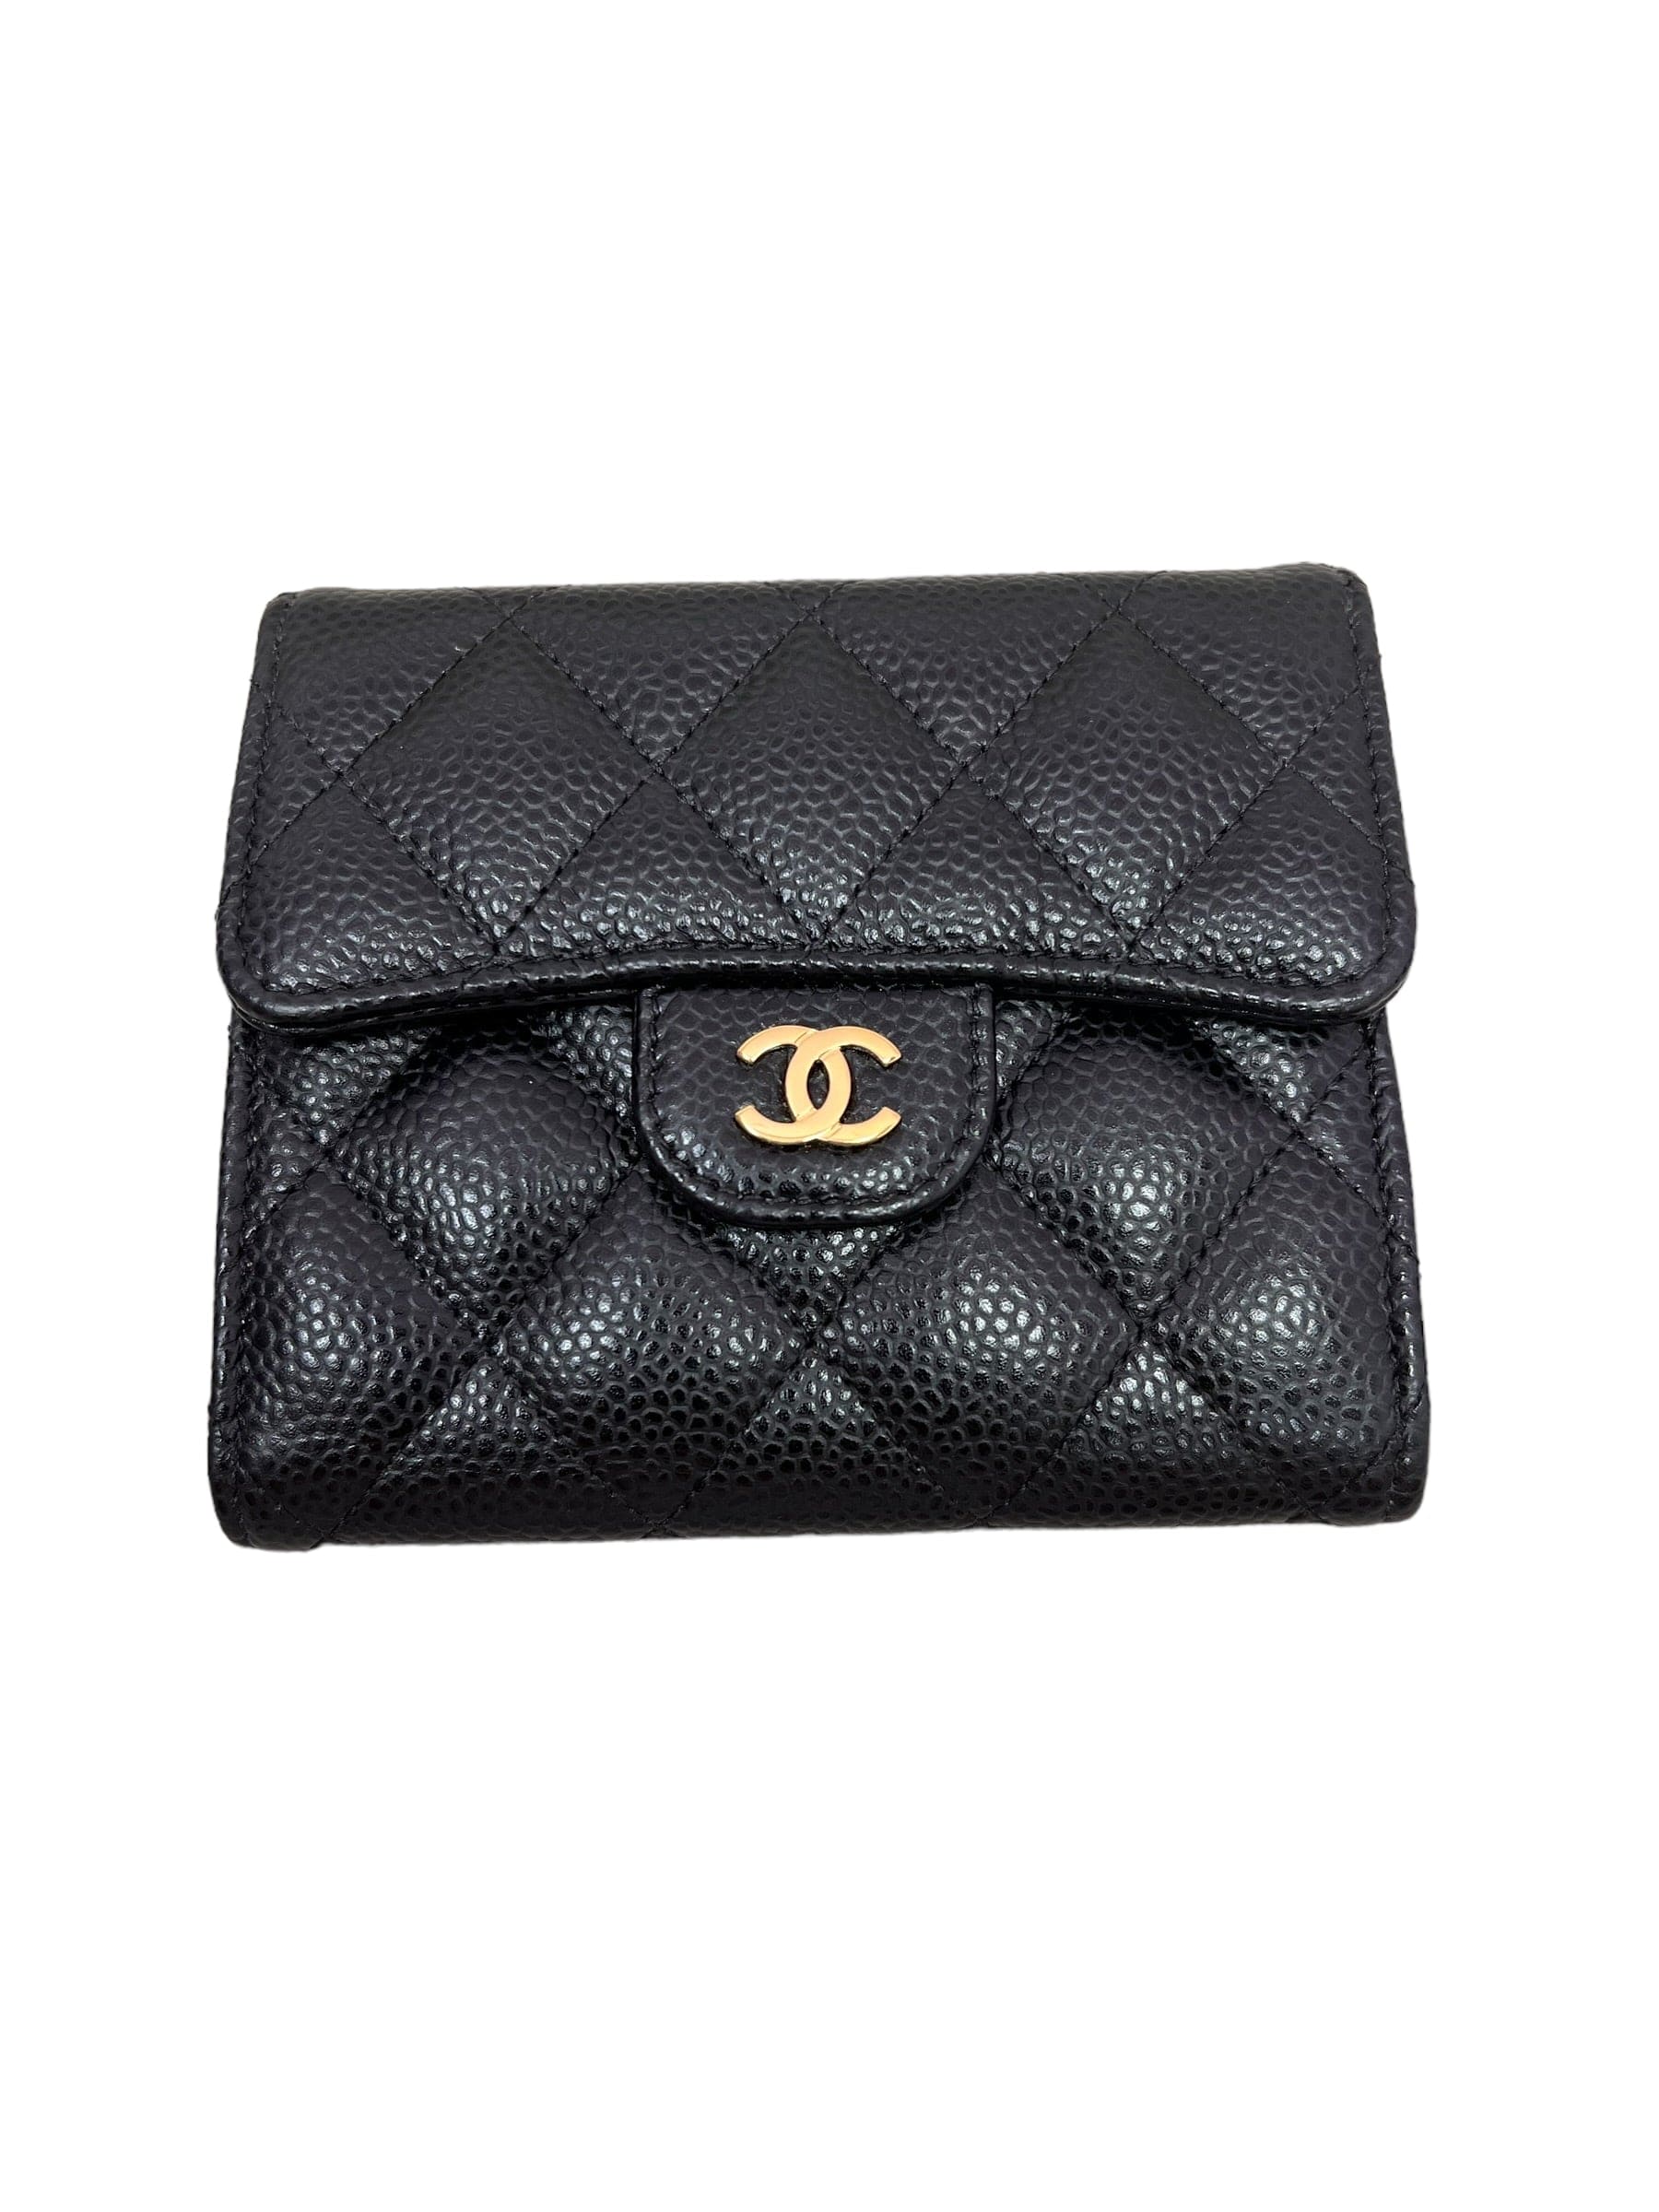 Chanel Classic Small Flap Wallet Trifold Black Caviar GHW